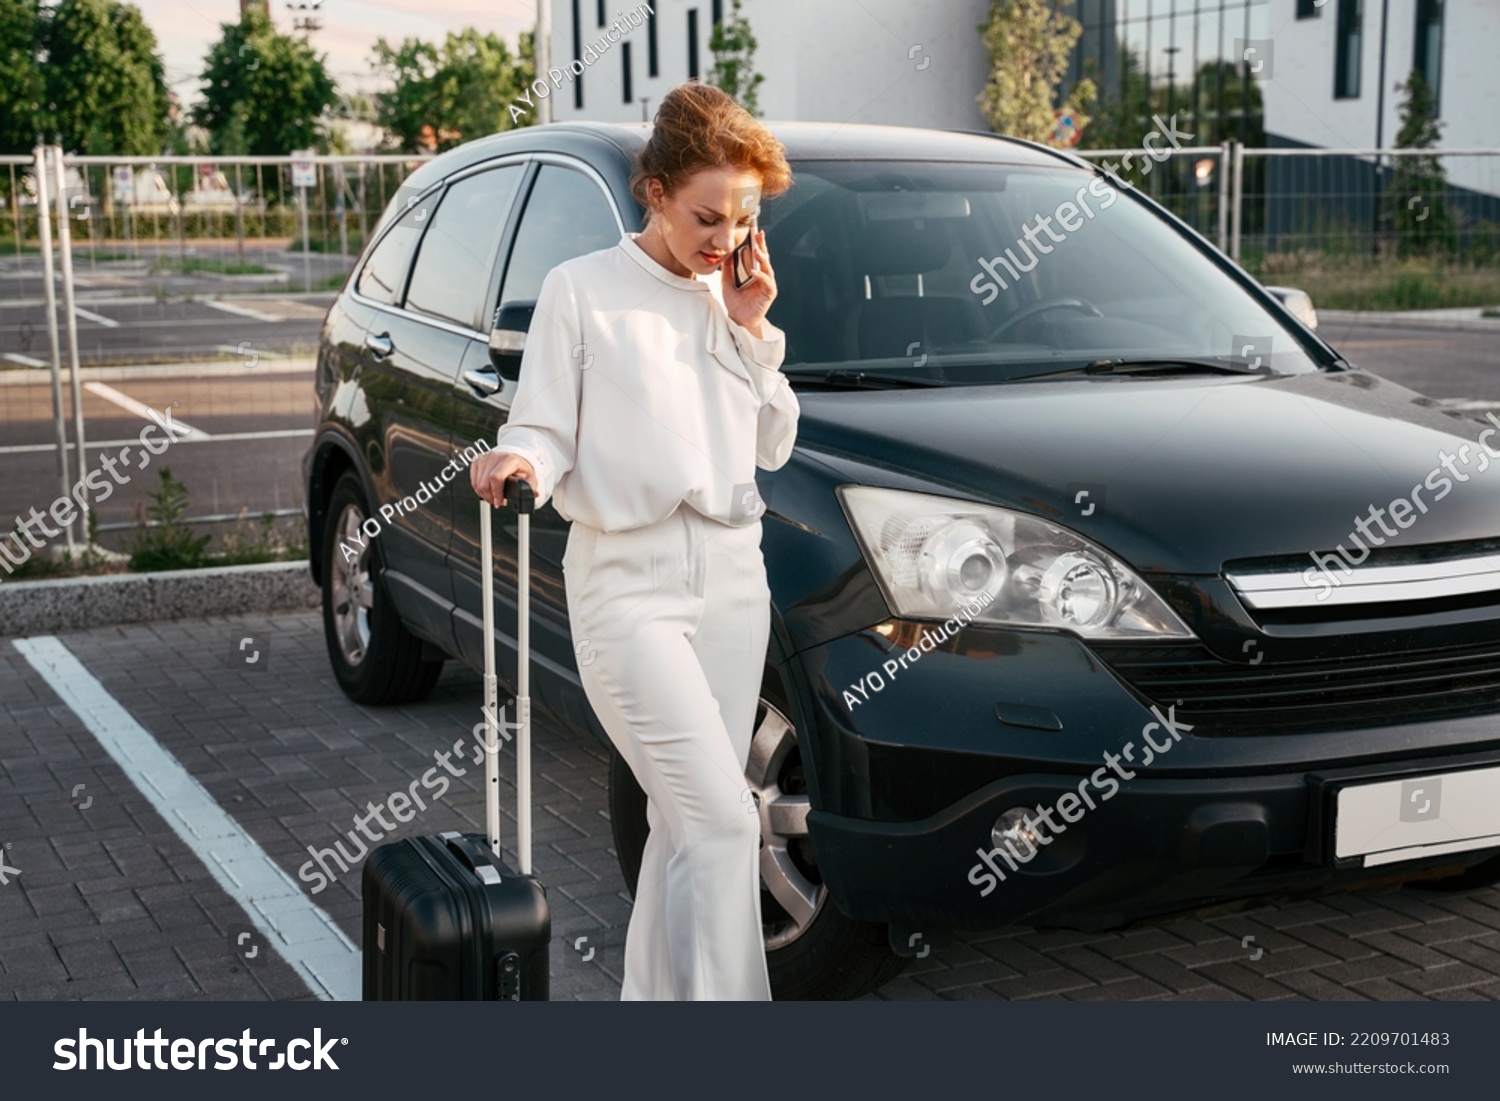 Stylish middle aged woman holding travel bag talking on mobile phone standing near new car. Business trip  concept	
 #2209701483